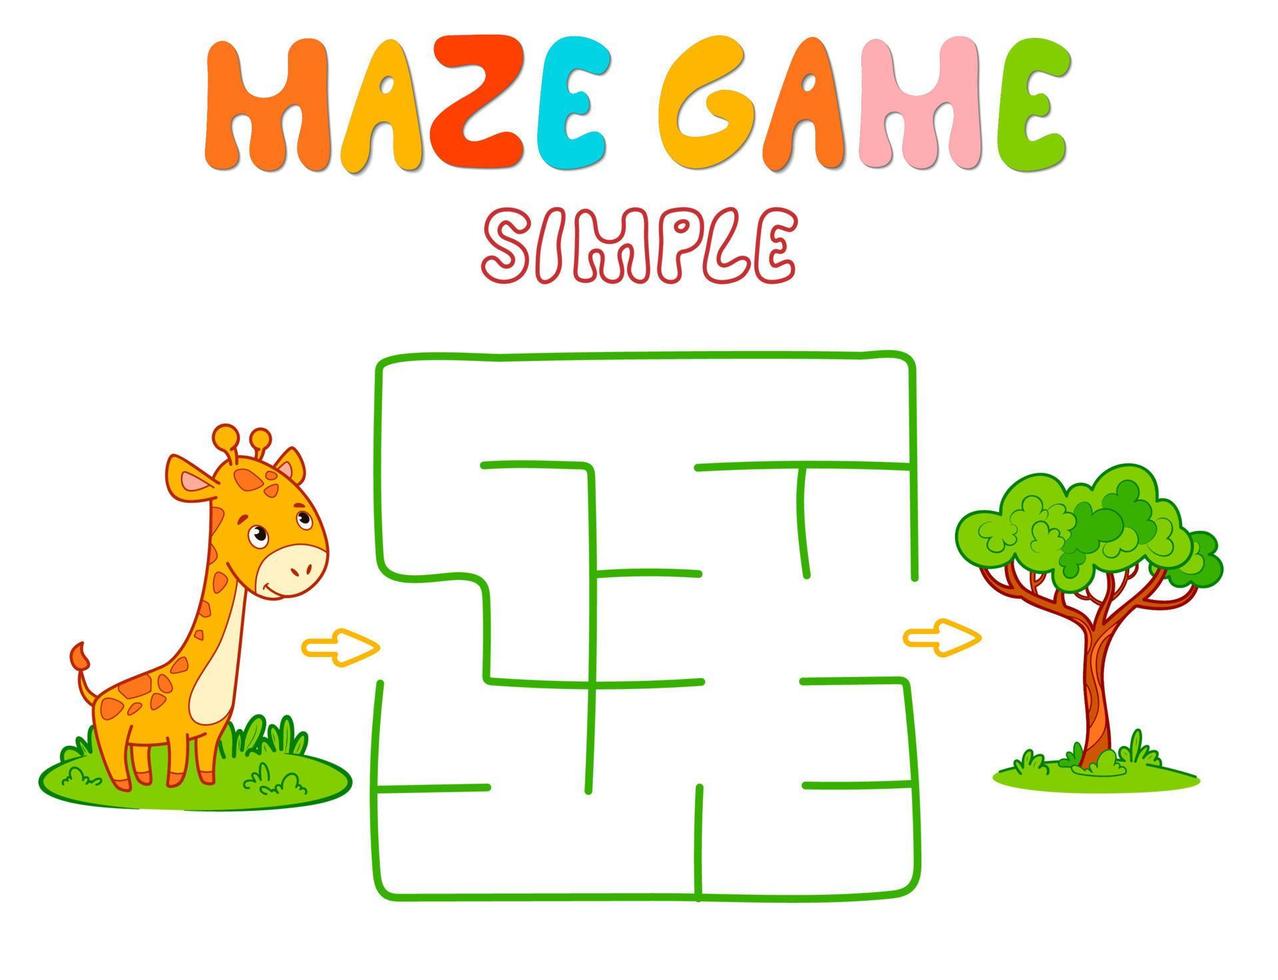 Simple Maze puzzle game for children. Color simple maze or labyrinth game with giraffe. vector